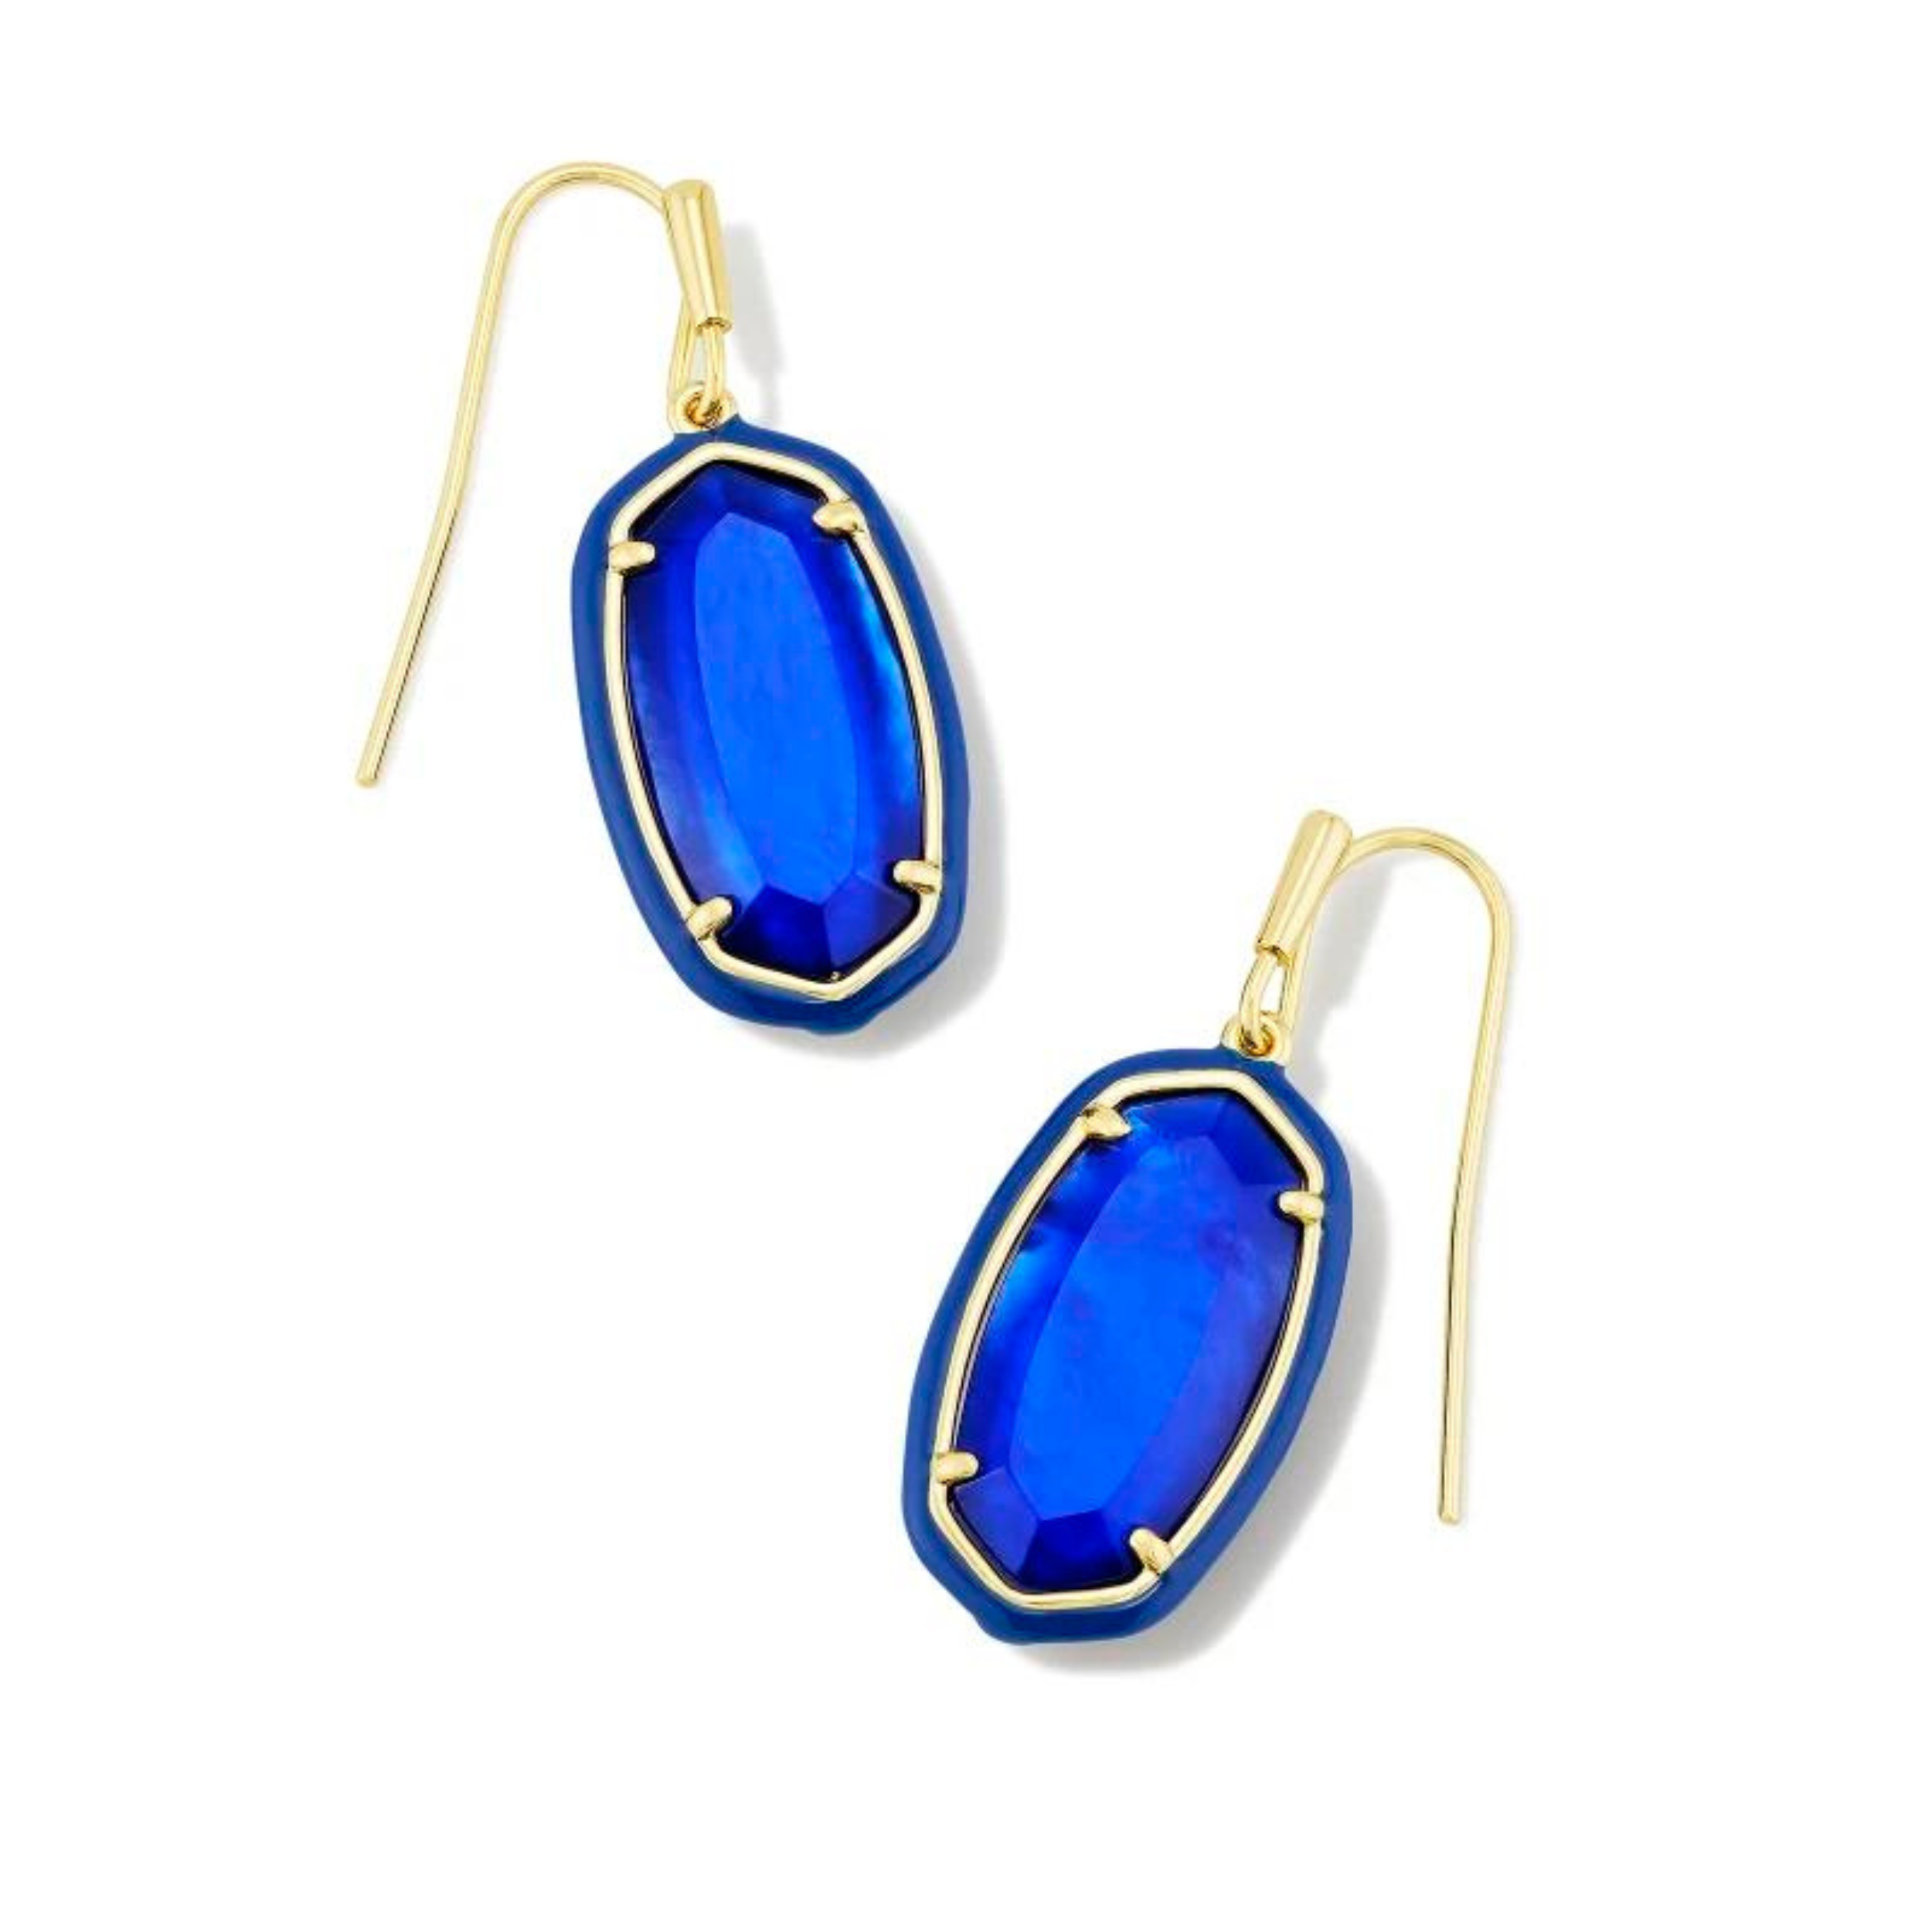 Blue framed, oval shaped drop earrings with a center blue stone and a gold fish hook earring. These earrings are pictured on a white background. 